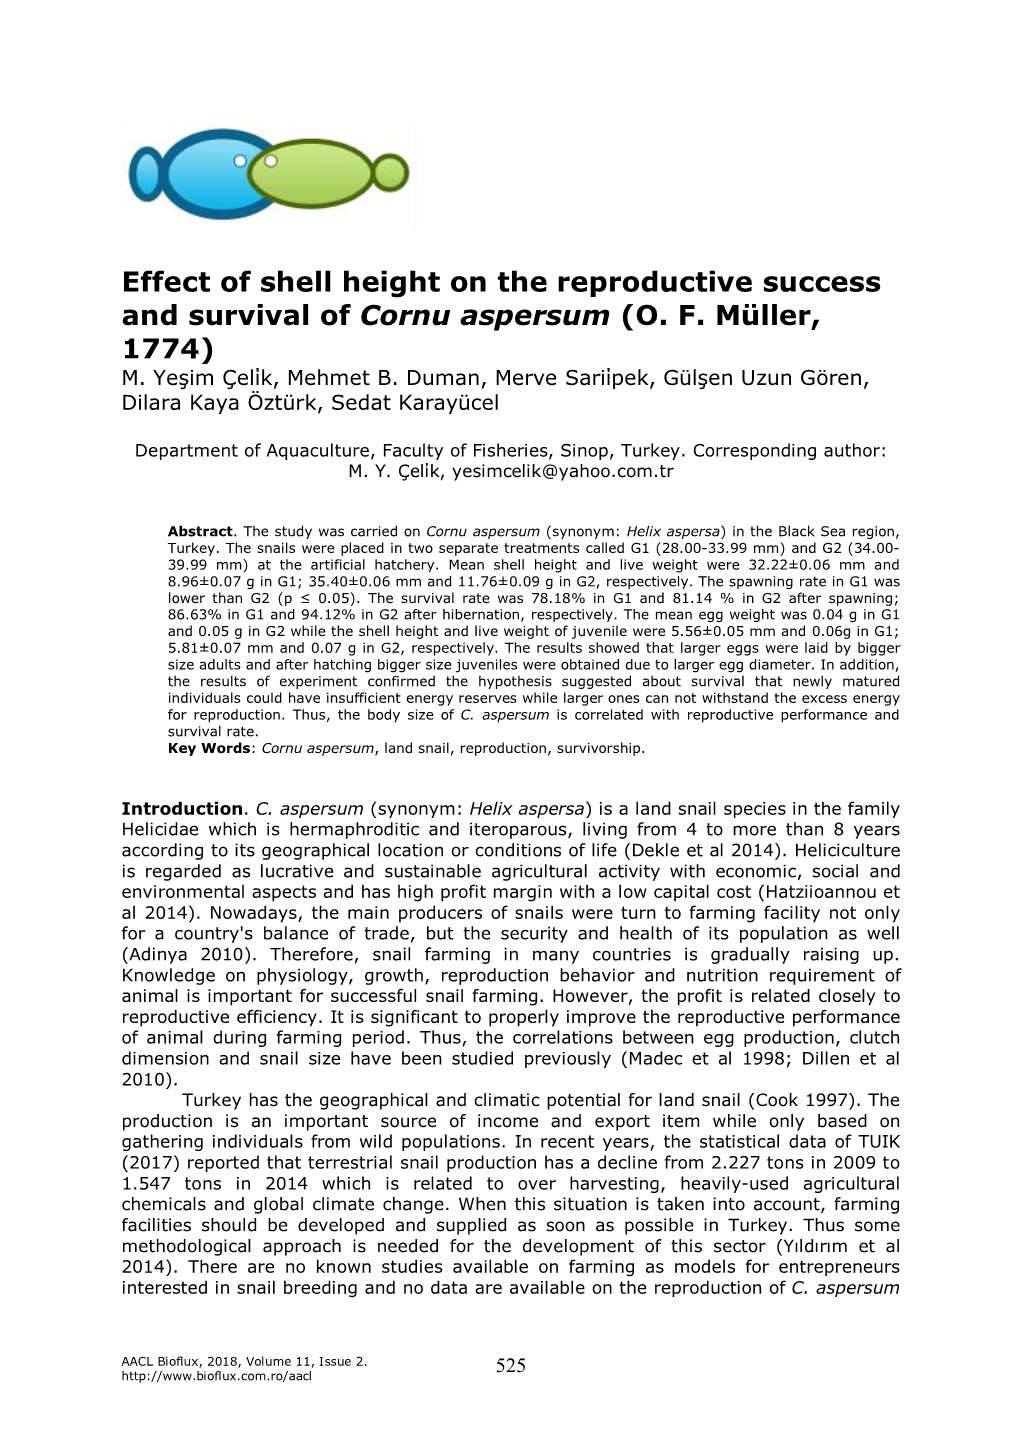 Effect of Shell Height on the Reproductive Success and Survival of Cornu Aspersum (O